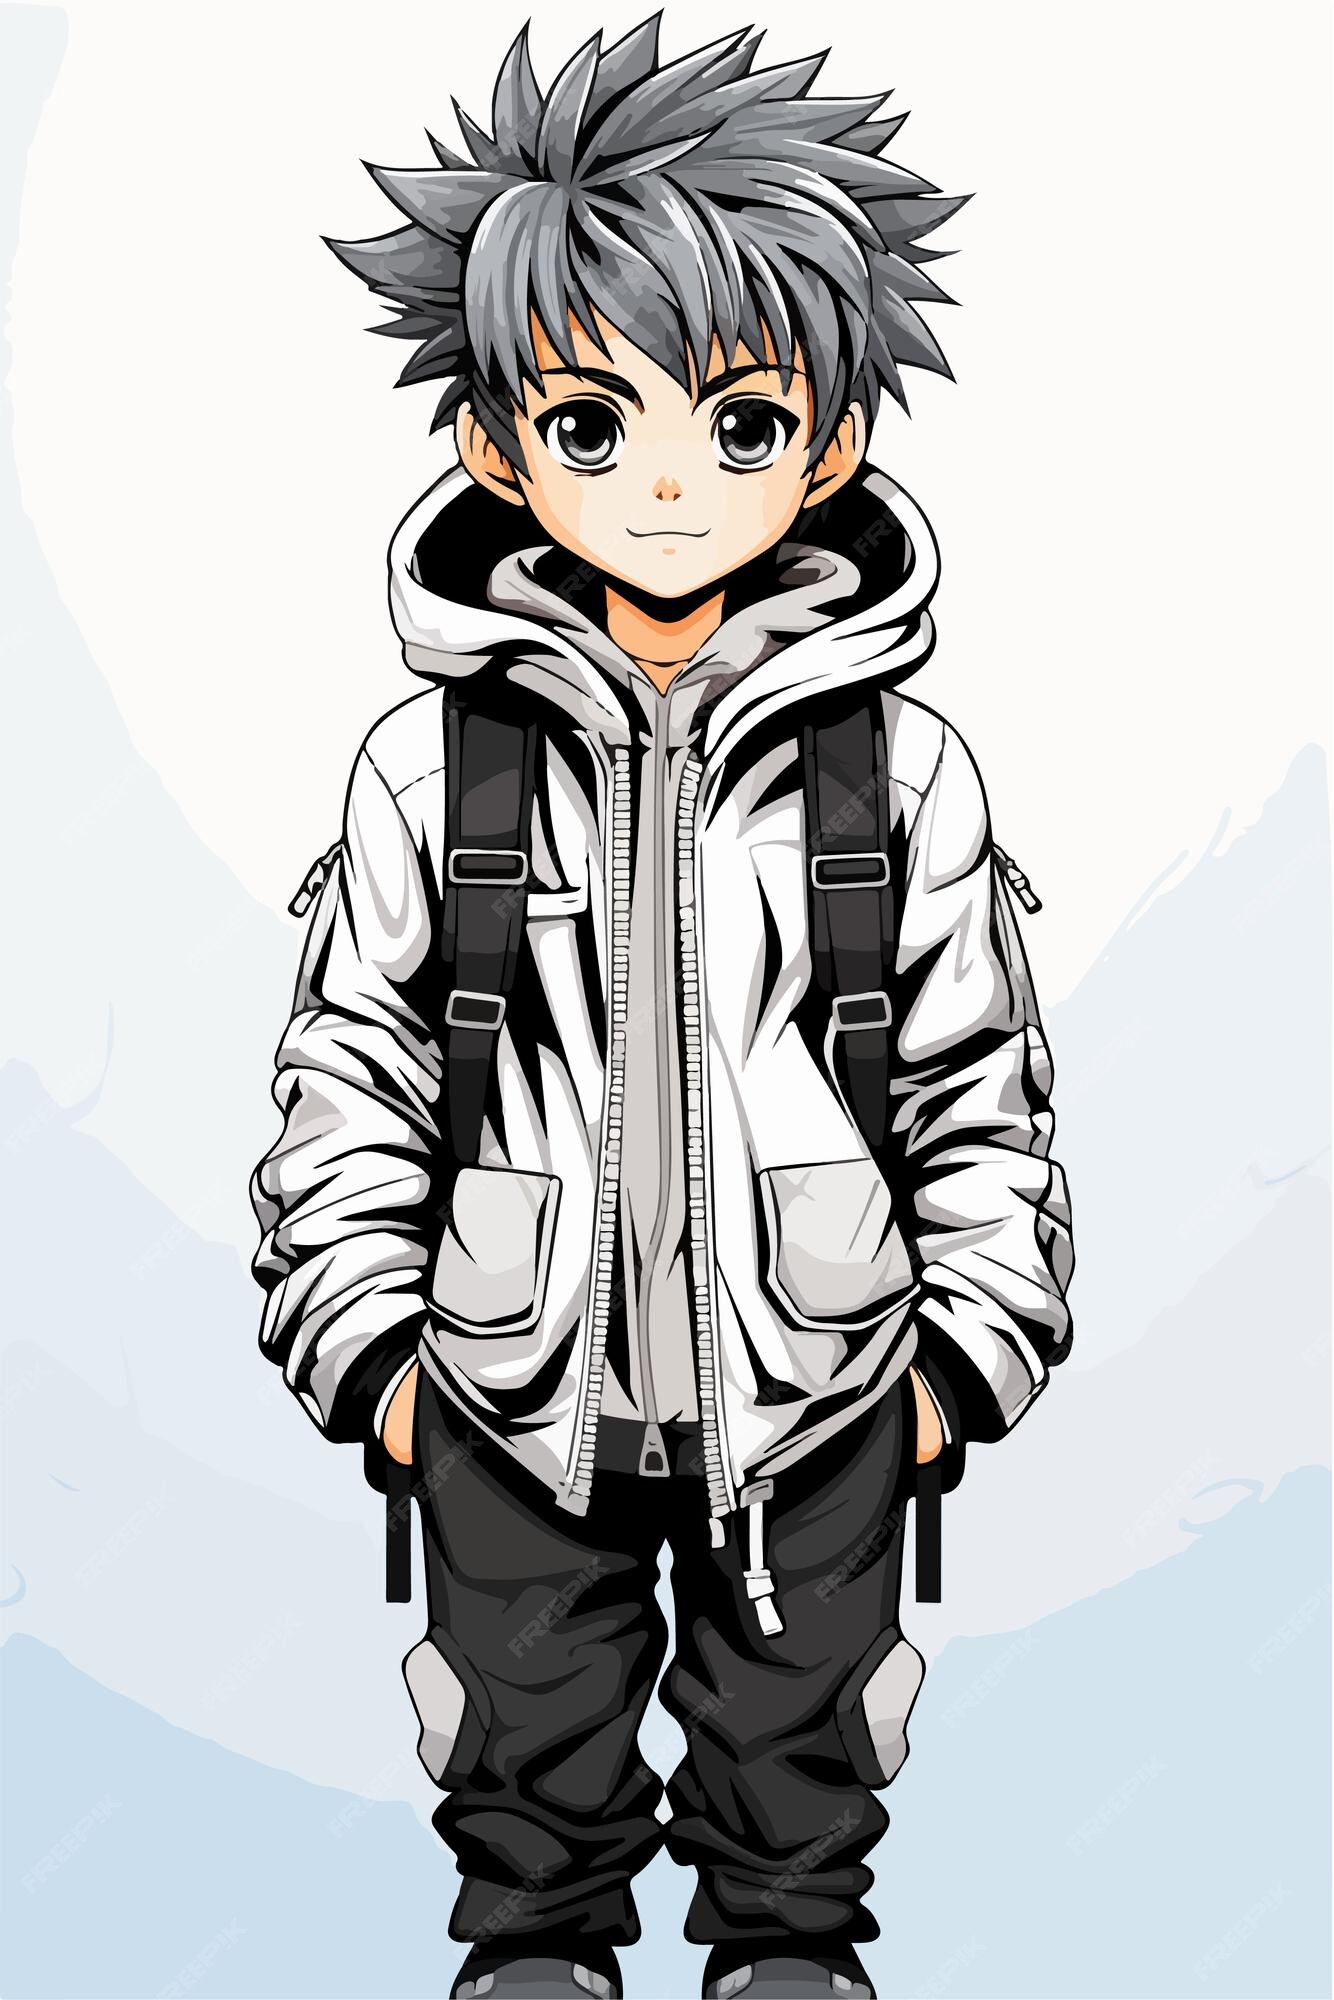 100,000 Anime boy Vector Images